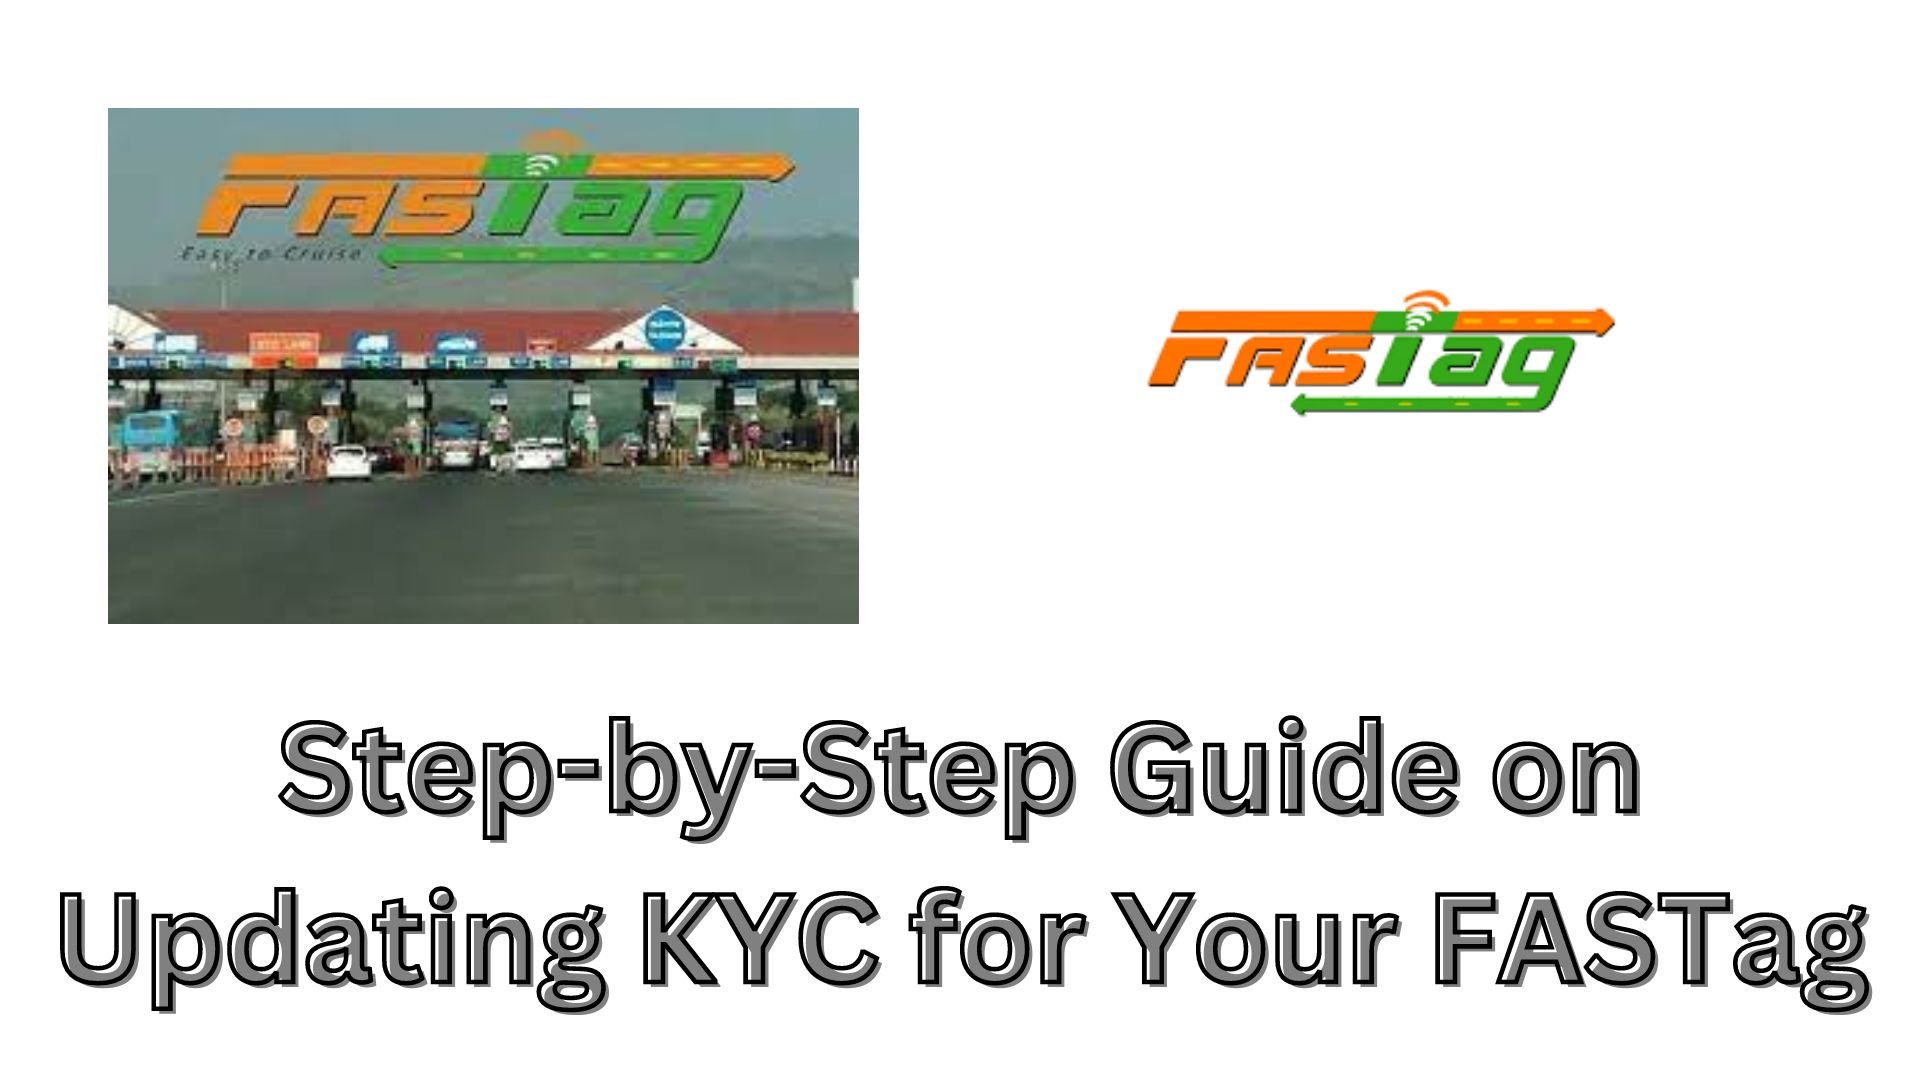 Step-by-Step Guide on Updating KYC for Your FASTag